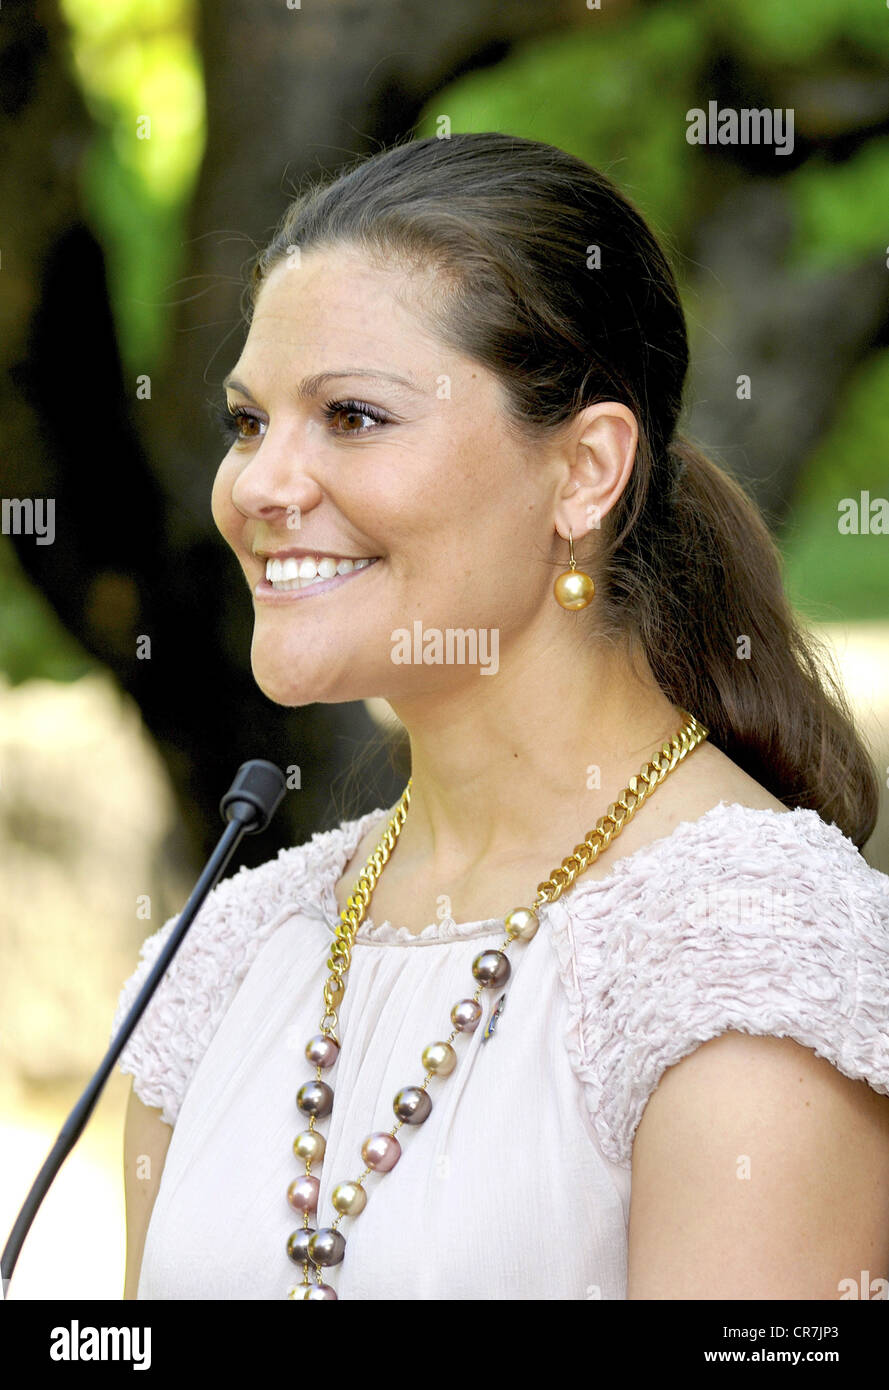 Victoria, * 14.7.1977, Crown Princess of Sweden since 1.1.1980, portrait, during a visit of the international youth library at Blutenburg Castle, Munich, Germany, 25.5.2011, Stock Photo